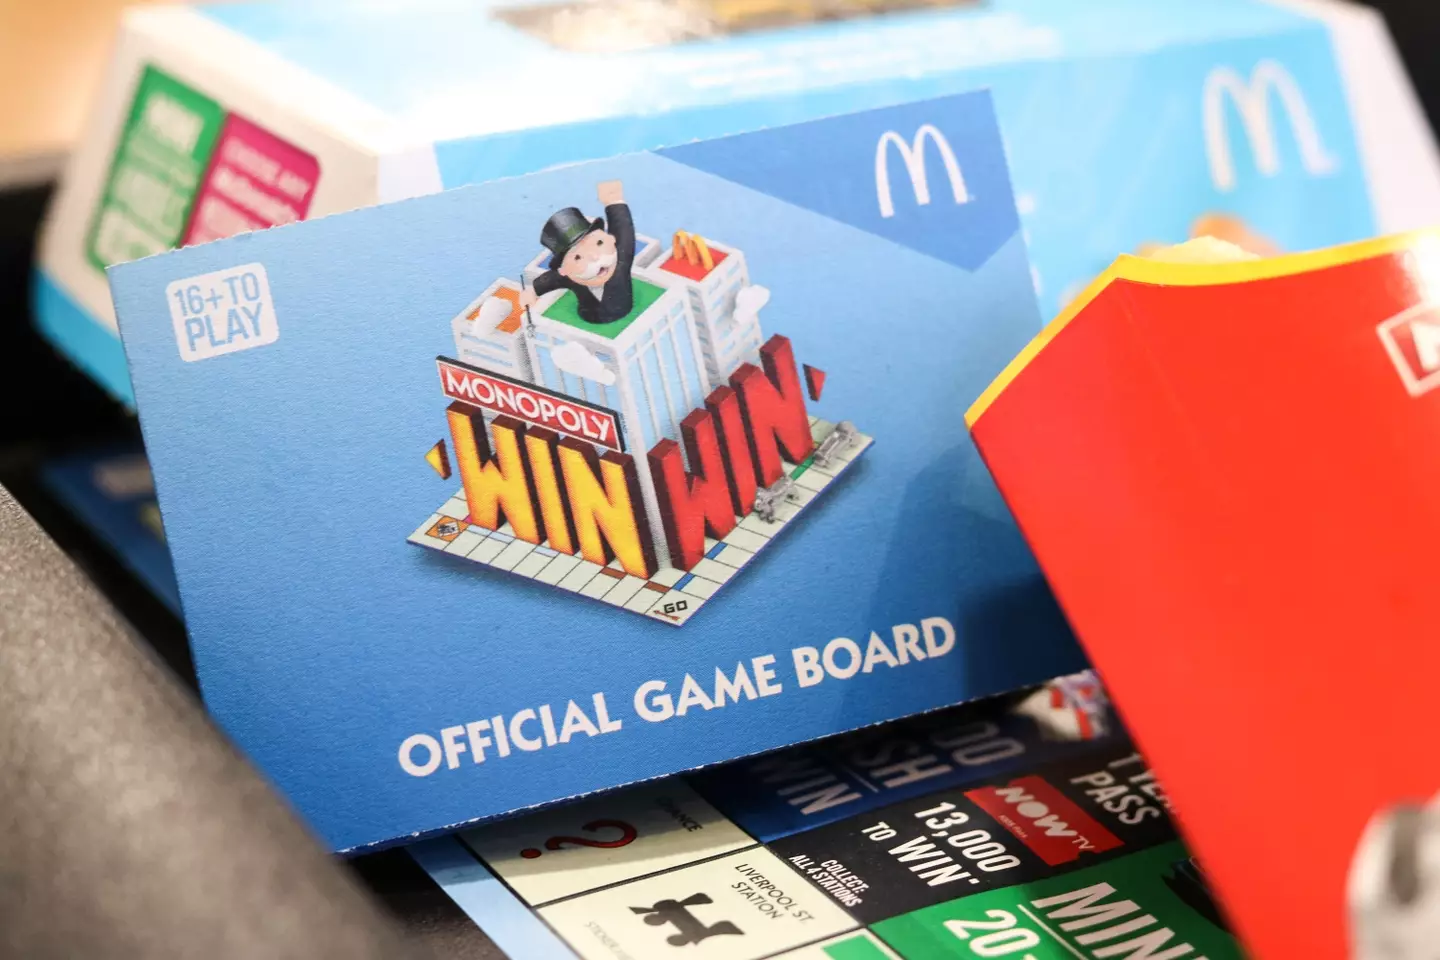 The McDonald's Monopoly game board.